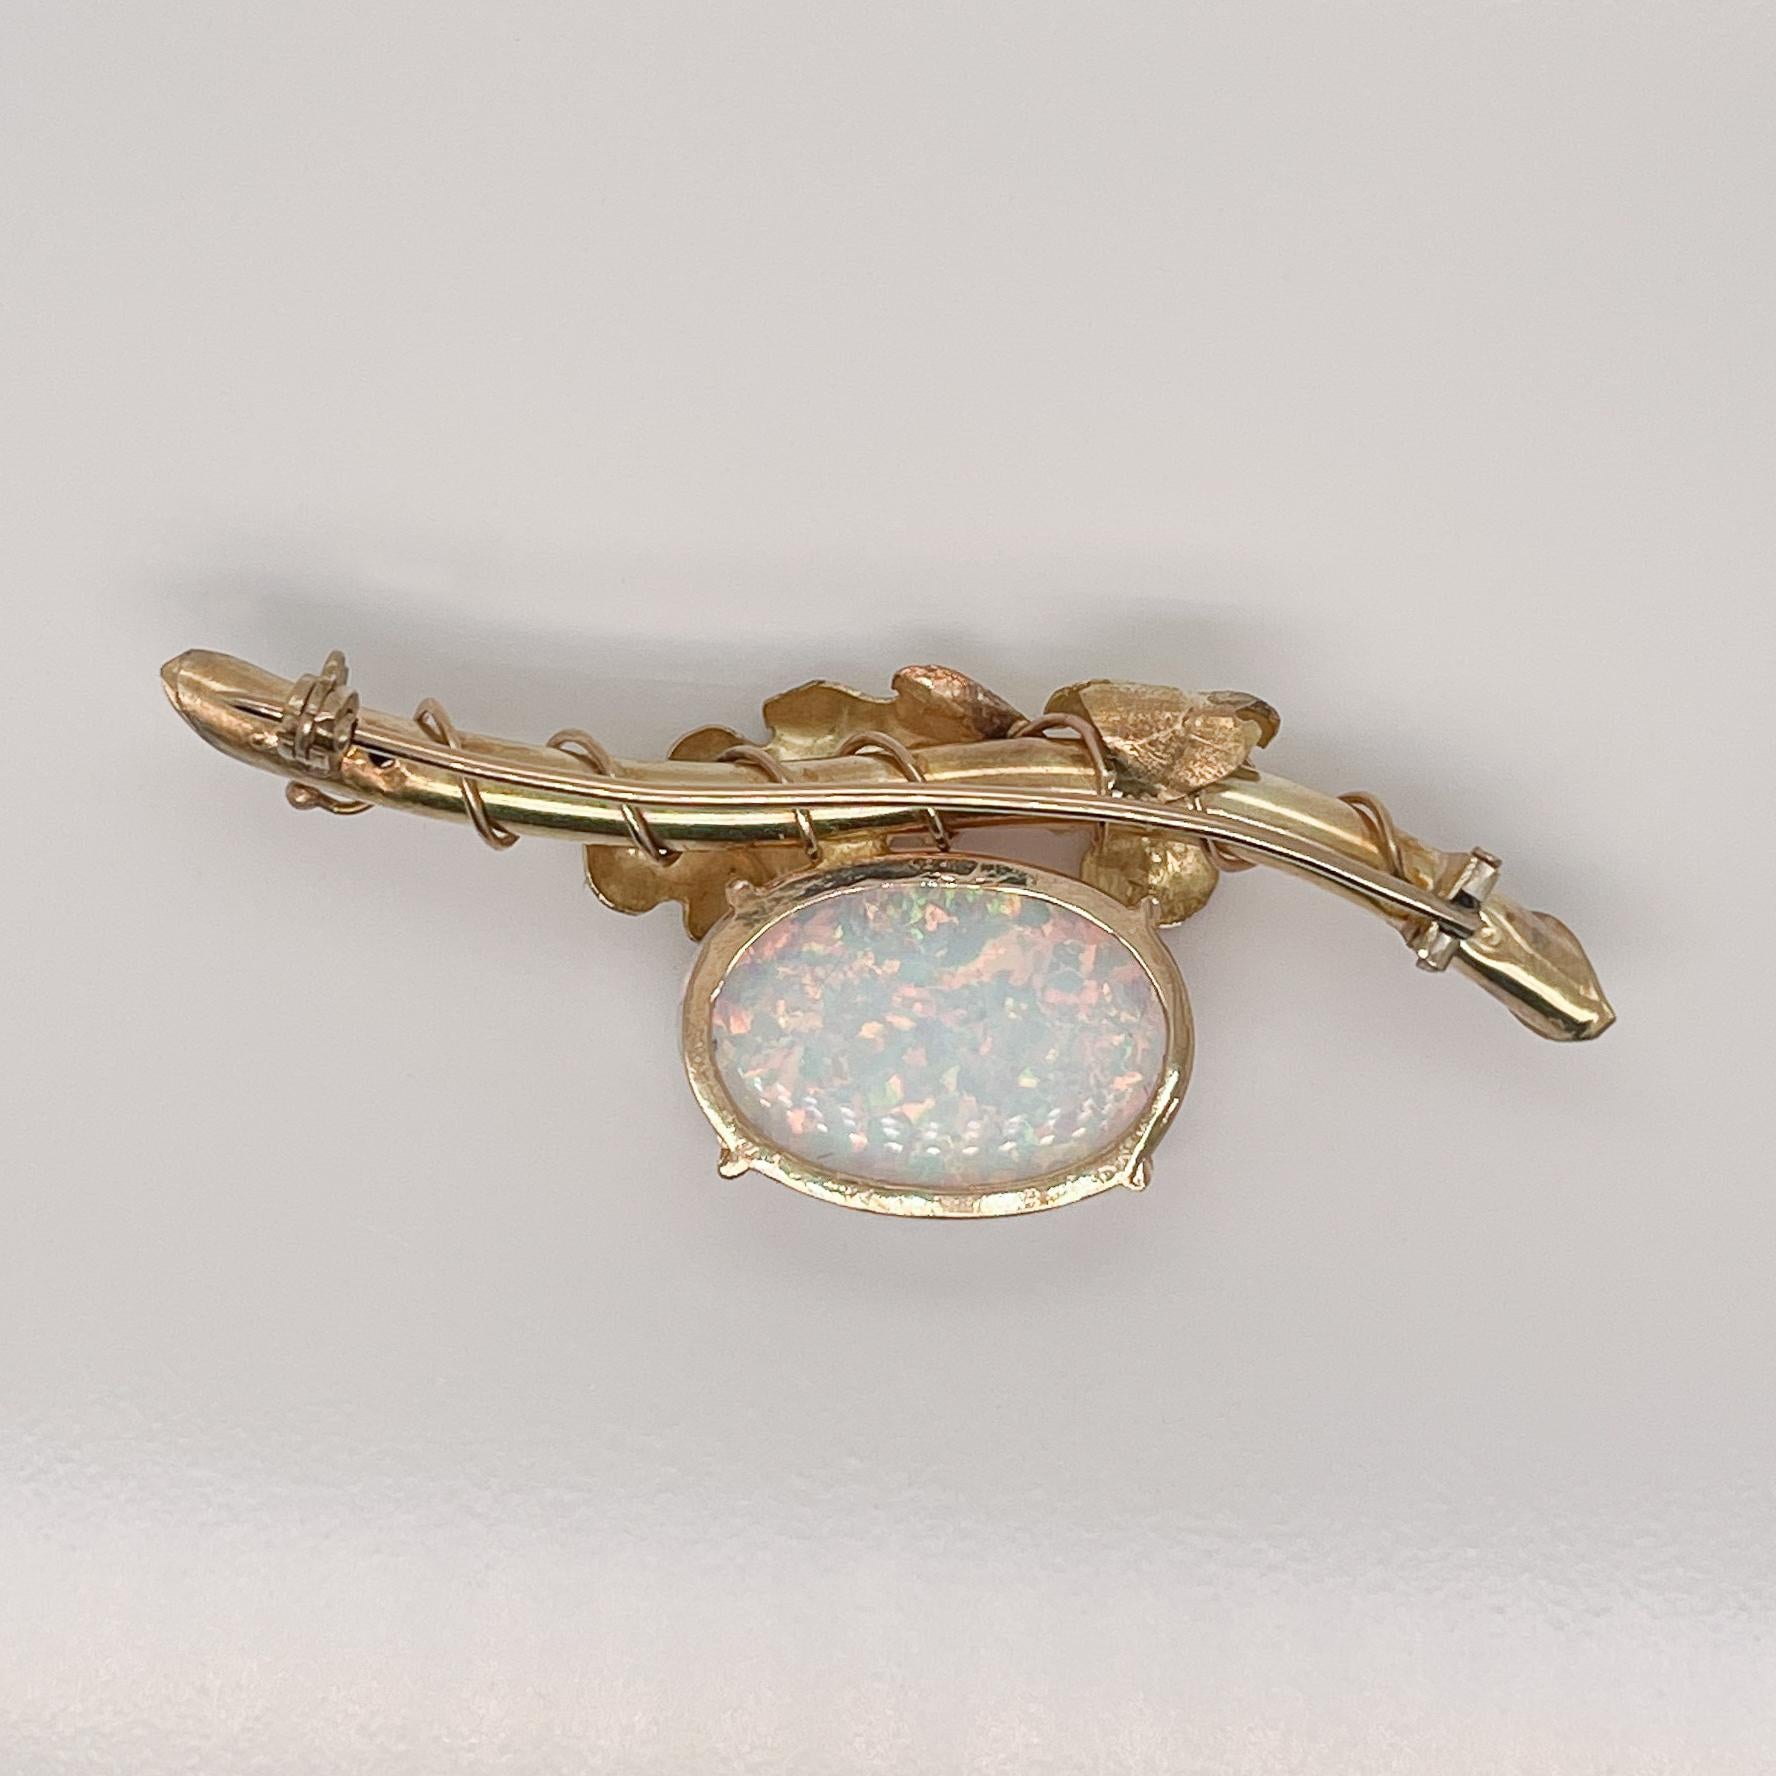 Edwardian Style 18 Karat Gold Brooch or Pin with a Opal Cabochon For Sale 1